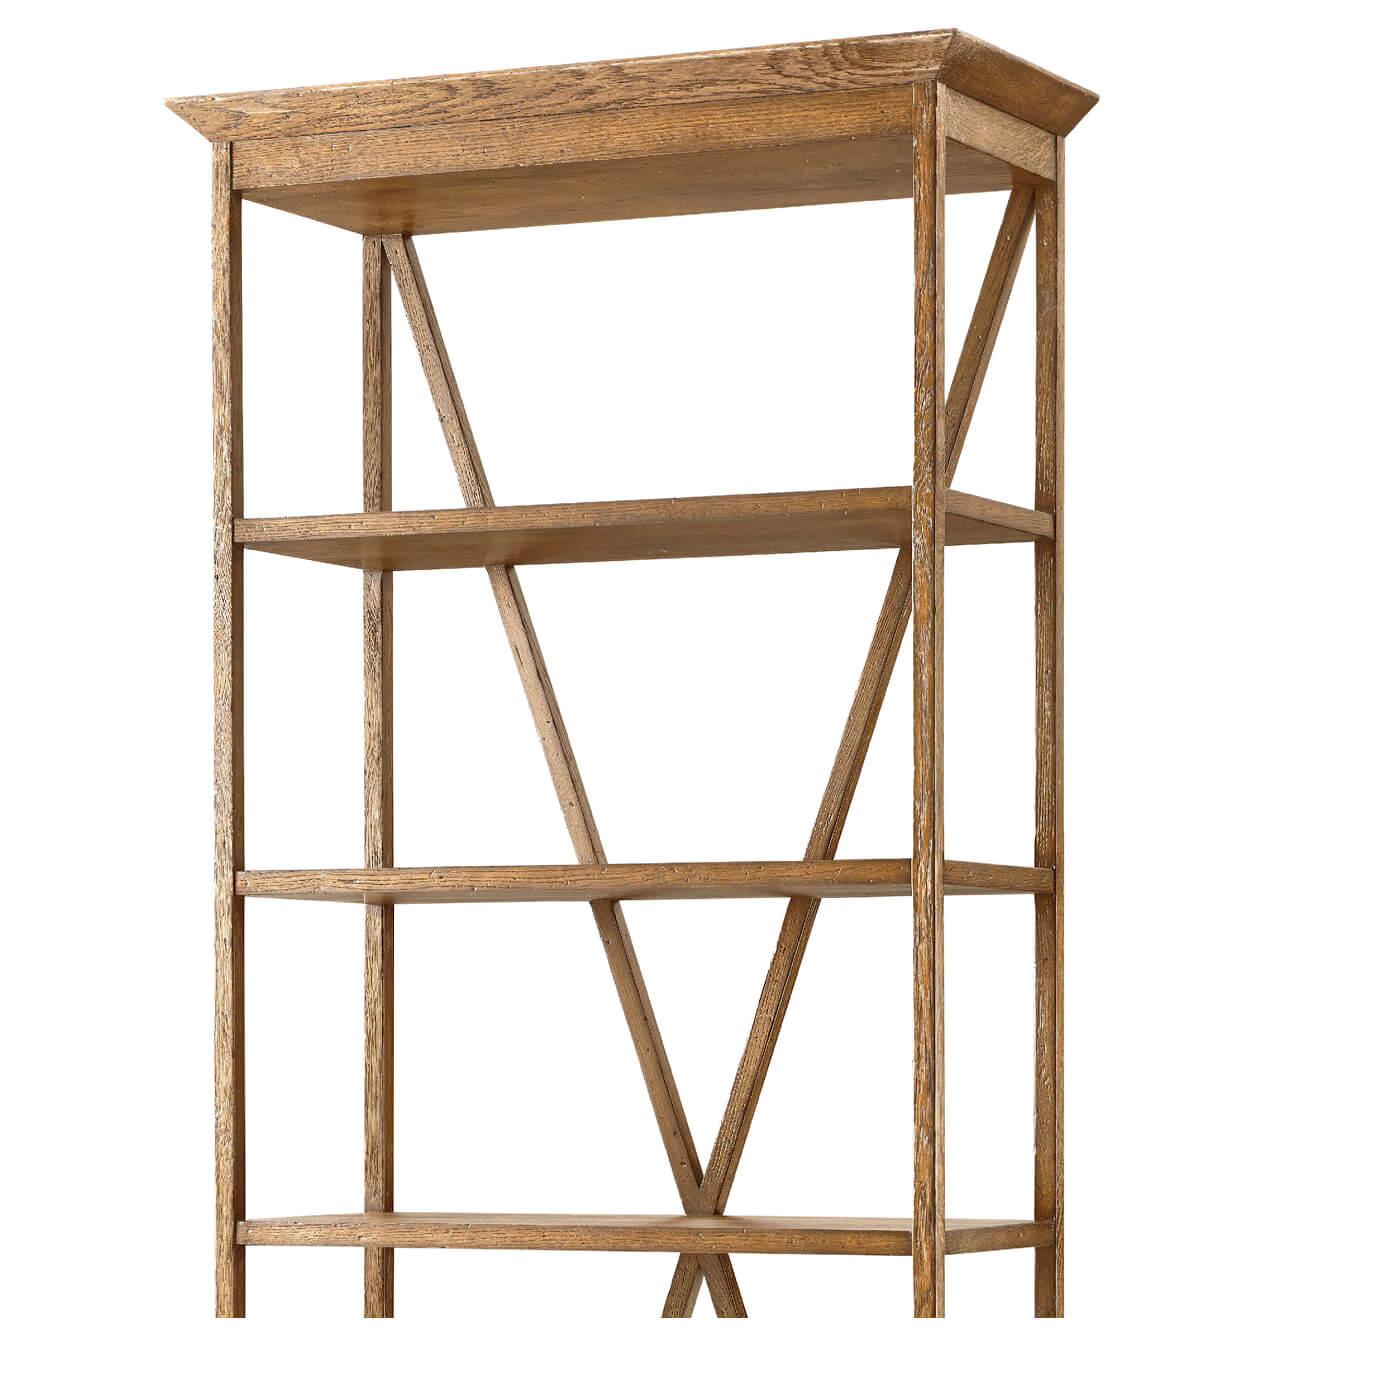 A modern rustic-style light oak etagere with five oak-crafted display shelves firmly supported by a crossed 